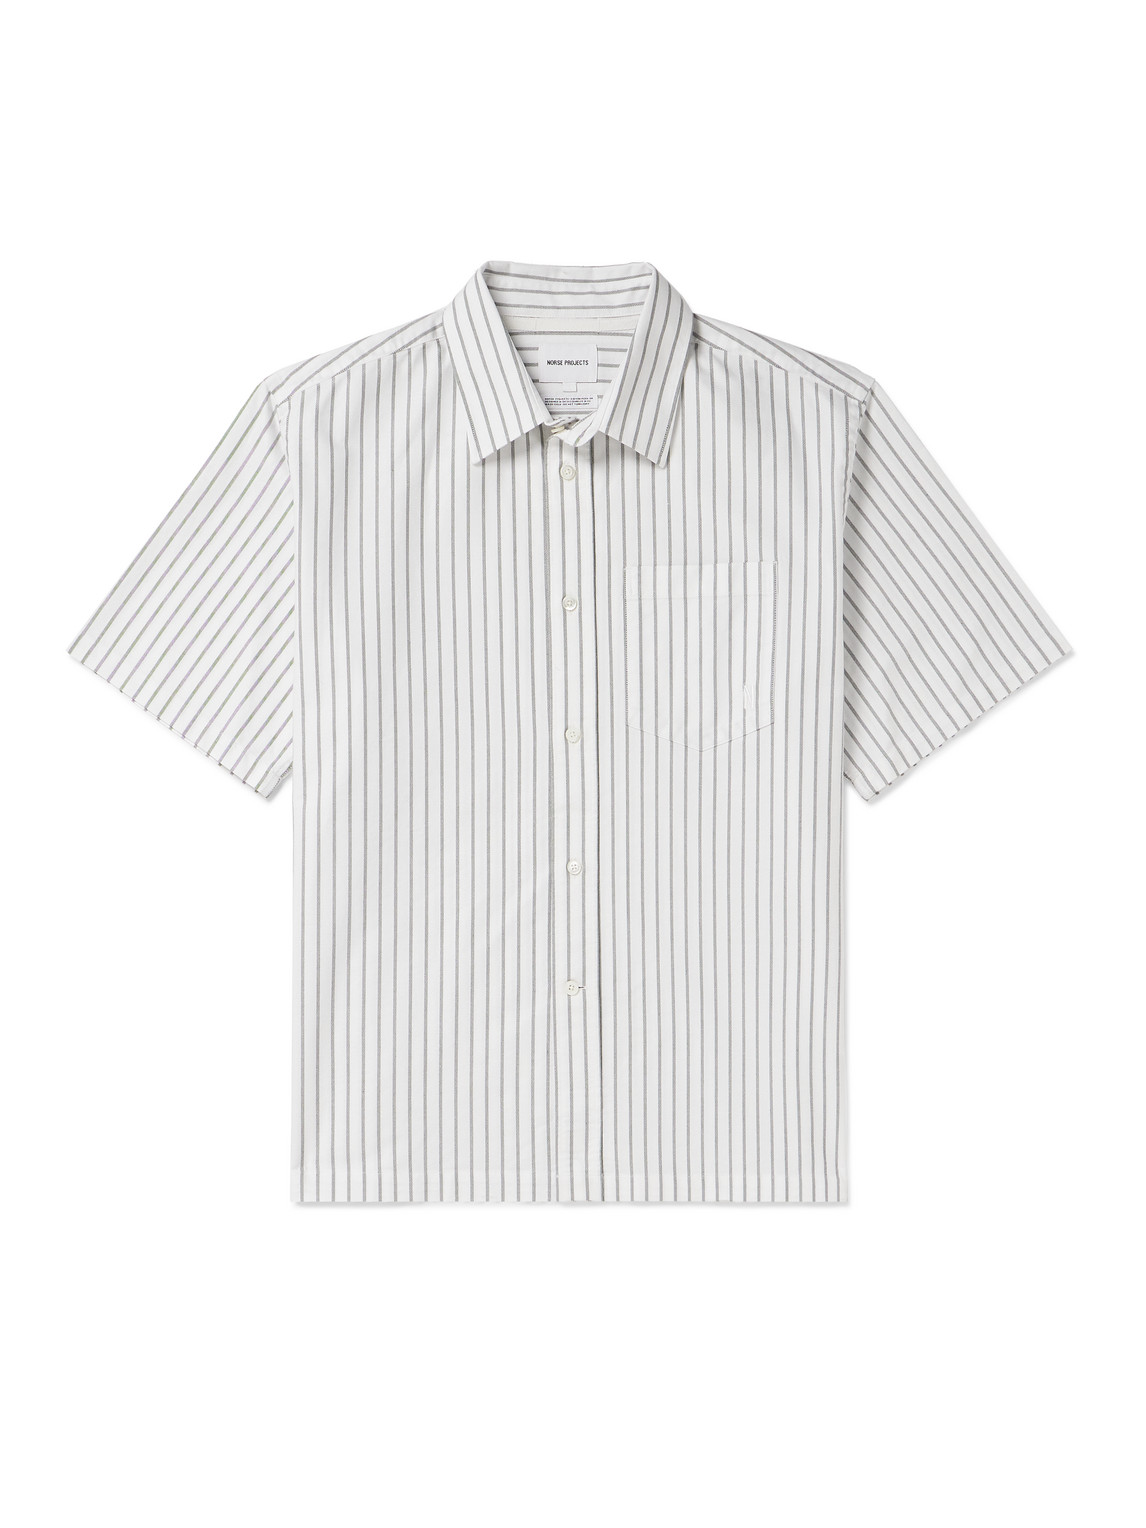 Norse Projects Ivan Striped Organic Cotton Shirt In White